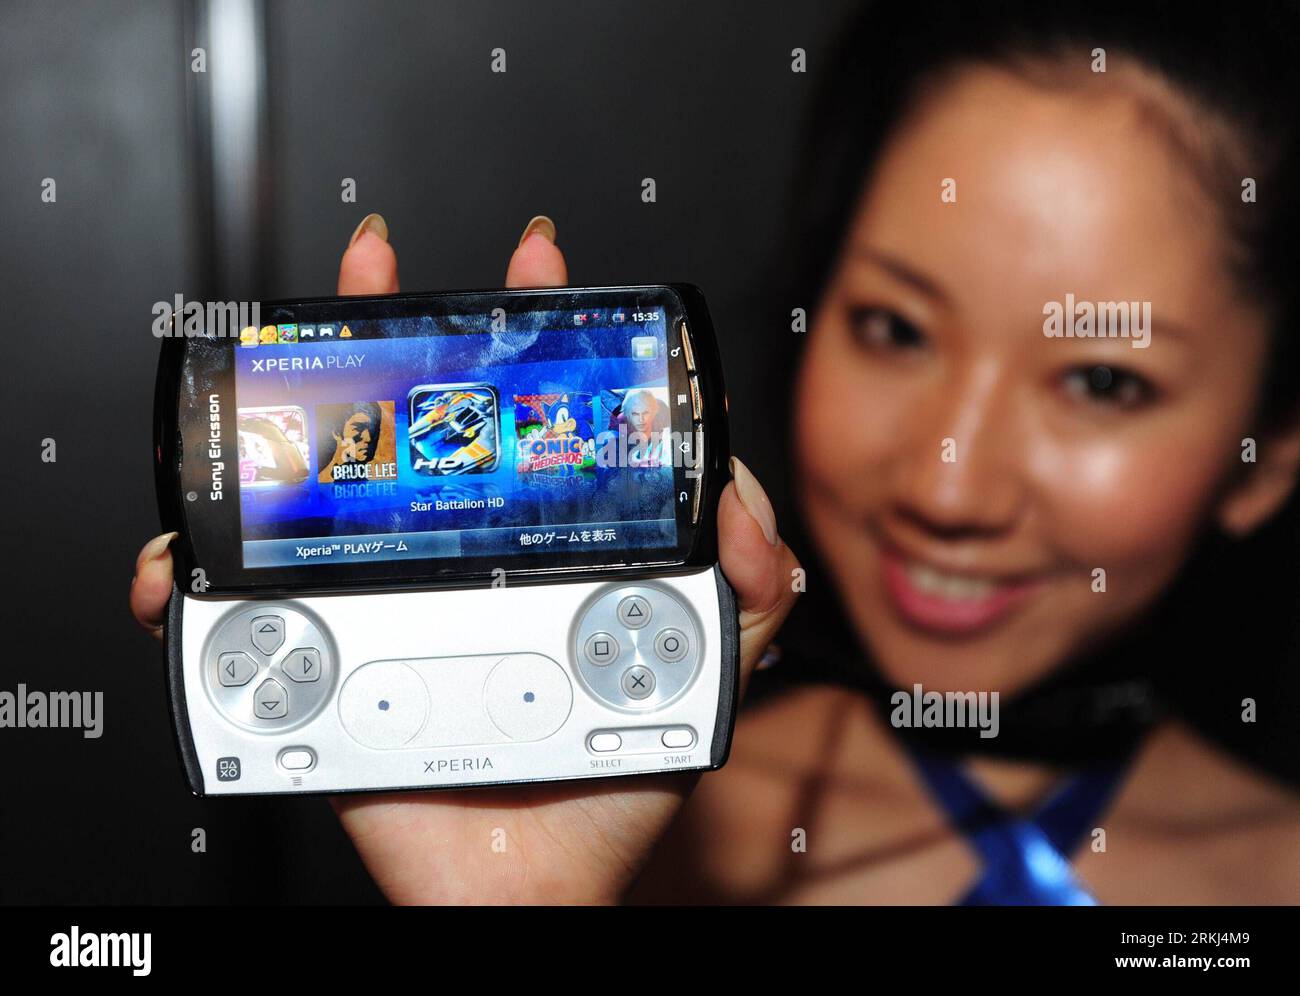 Bildnummer: 55982008  Datum: 15.09.2011  Copyright: imago/Xinhua (110915) -- CHIBA, Sept. 15, 2011 (Xinhua) -- A model display smartphone with games at the Tokyo Game Show in Chiba, east of Tokyo, Sept. 15, 2011. Tokyo Game Show opened Thursday in Chiba Prefecture. (Xinhua/Ji Chunpeng) (yc) JAPAN-CHIBA-GAME SHOW PUBLICATIONxNOTxINxCHN Wirtschaft Messe Videospiele Videospielemesse Spielemesse Spiele x2x xtm 2011 quer o0 Sony Ericsson Xperia     55982008 Date 15 09 2011 Copyright Imago XINHUA  Chiba Sept 15 2011 XINHUA a Model Display Smartphone With Games AT The Tokyo Game Show in Chiba East of Stock Photo